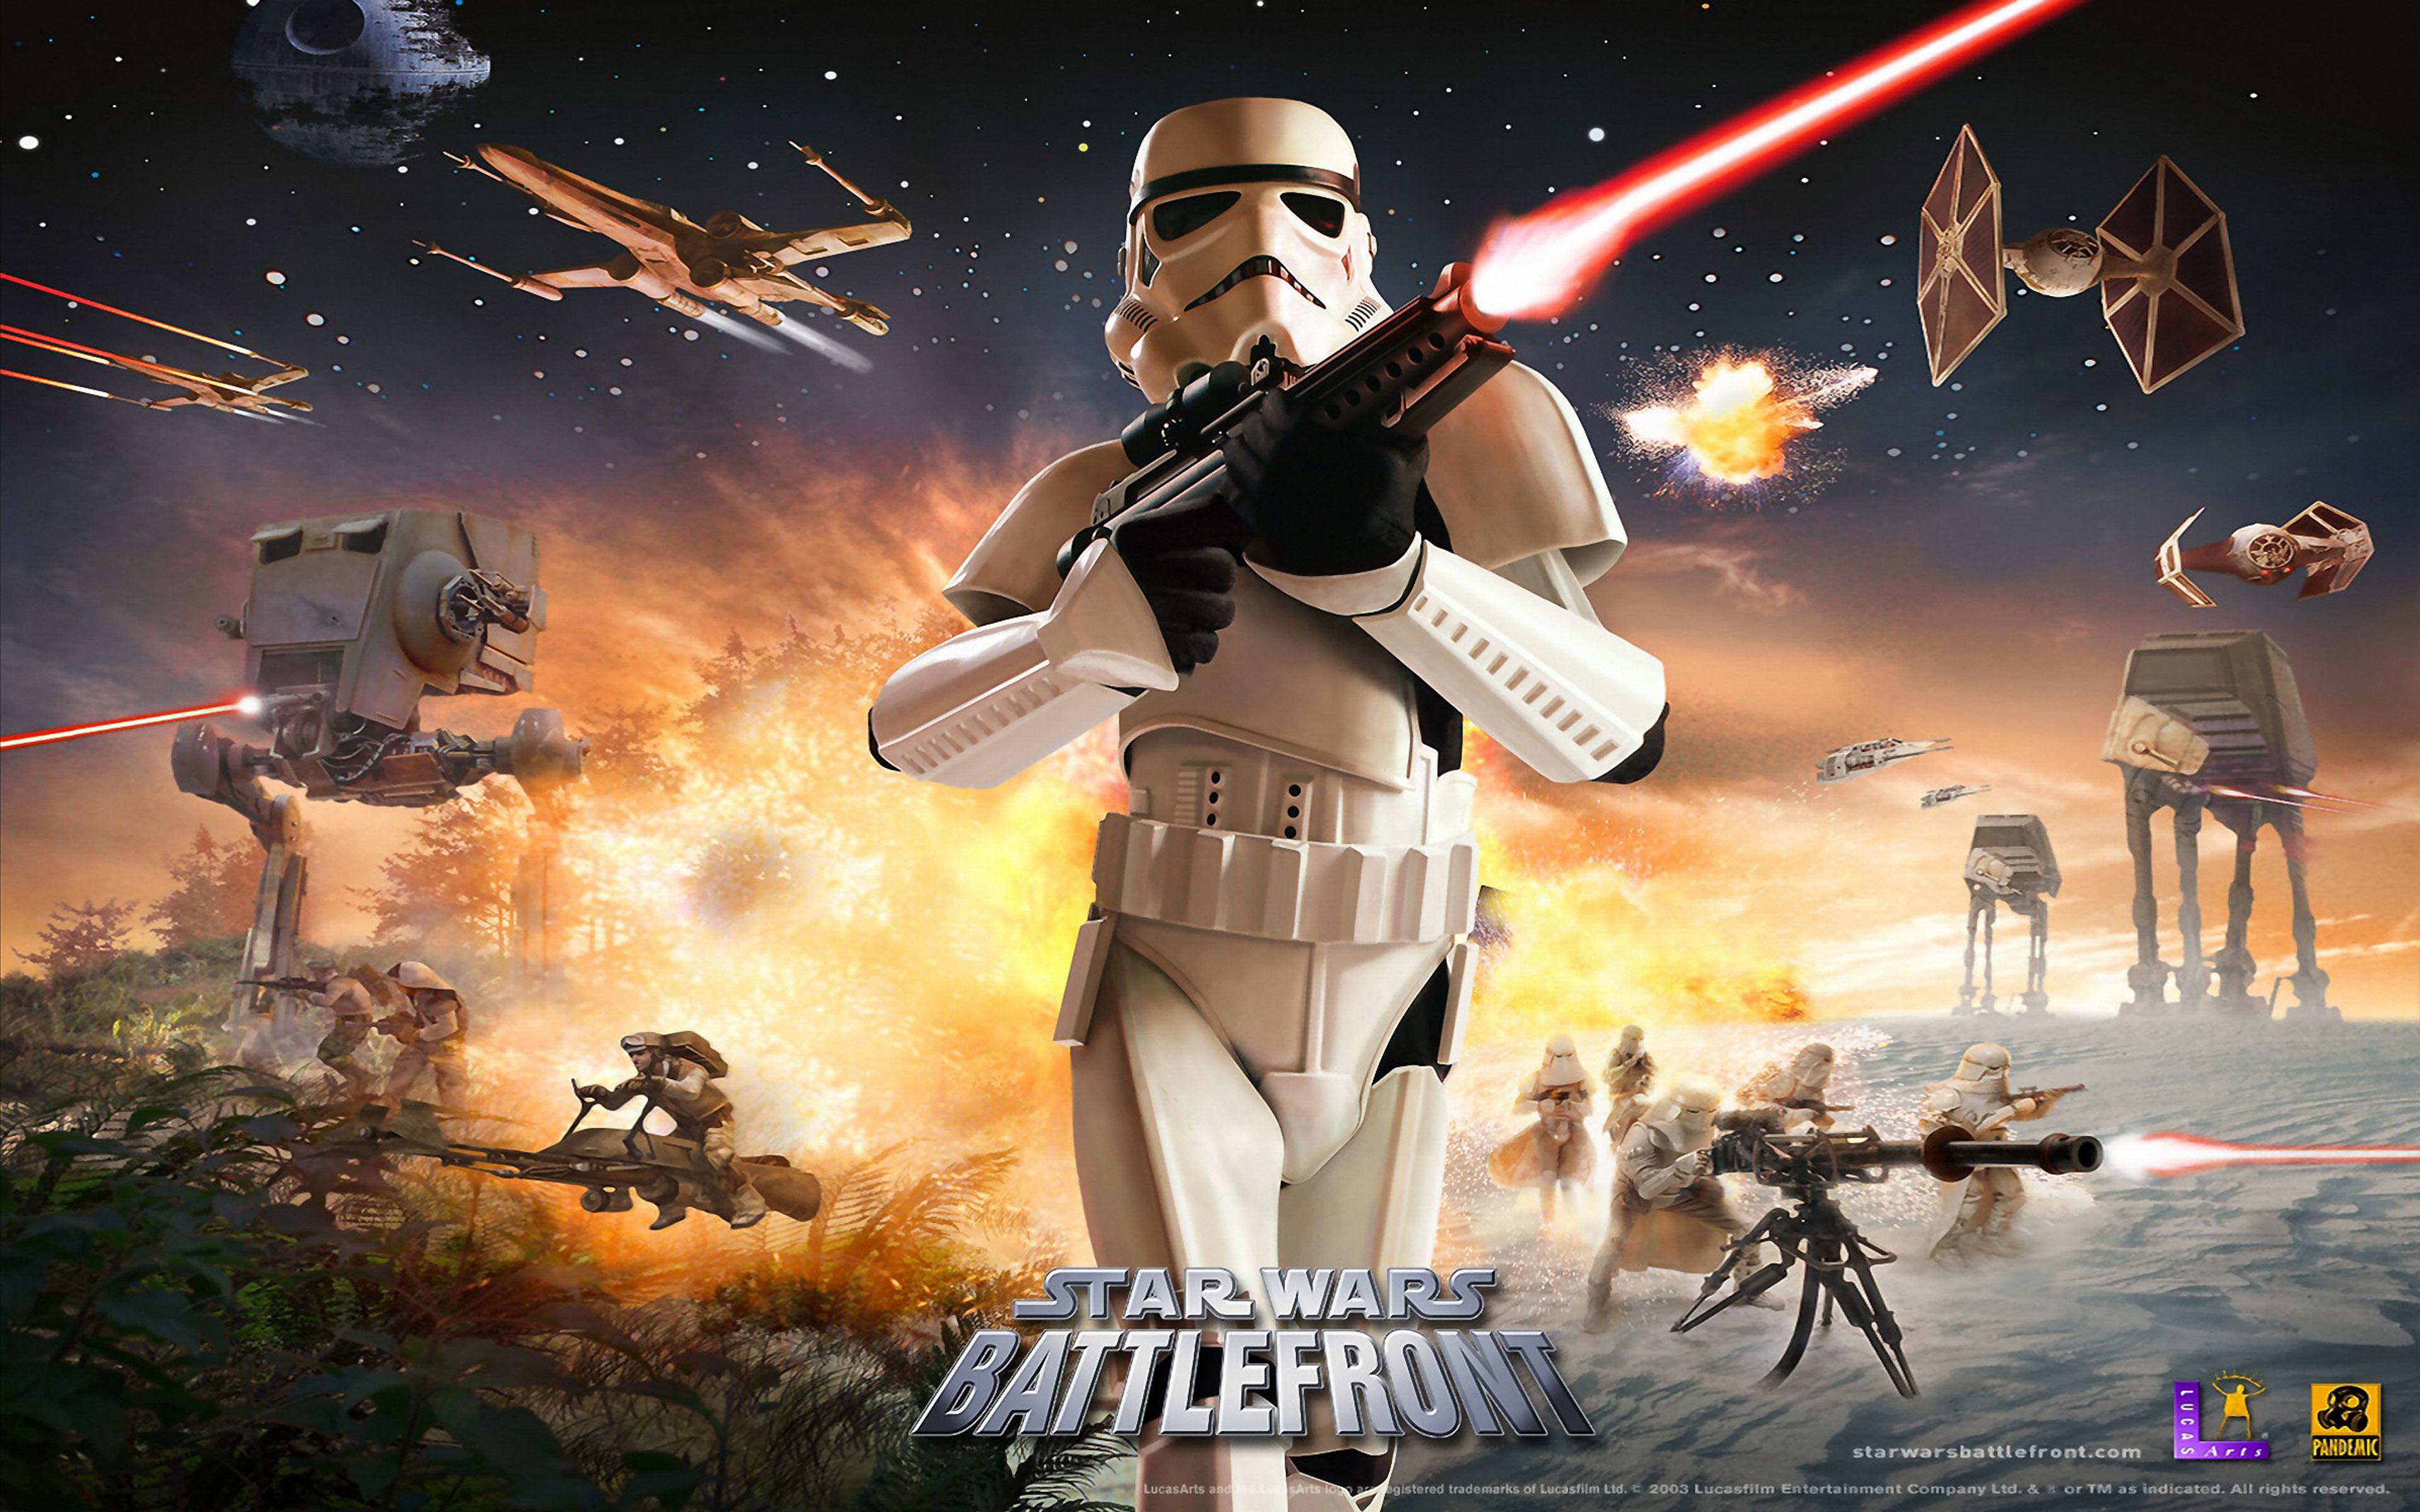 Star wars battlefront classic collection switch. Star Wars Battlefront 1. Star Wars Battlefront 2 2004. Star Wars Battlefront 2004. Star Wars Battlefront 2003.